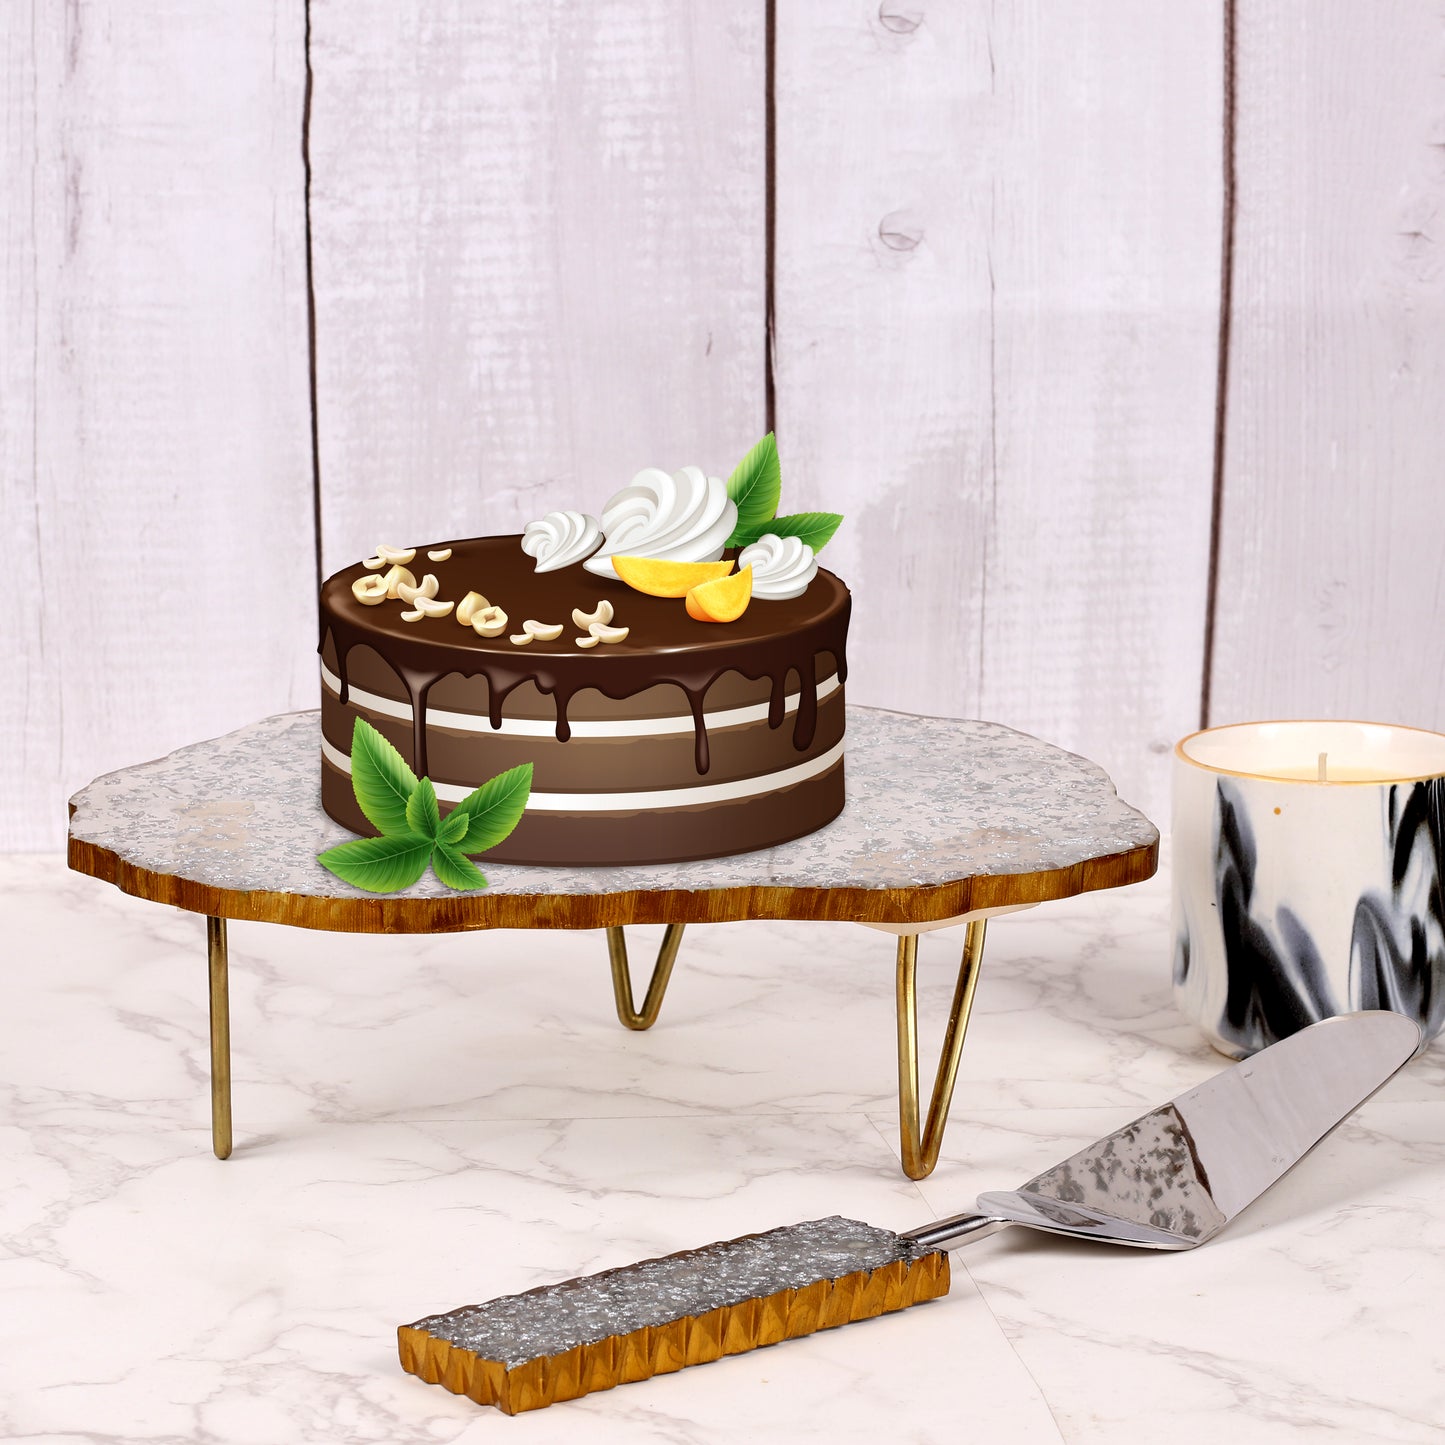 The Fluidic Silver Metal Accent Cake Stand